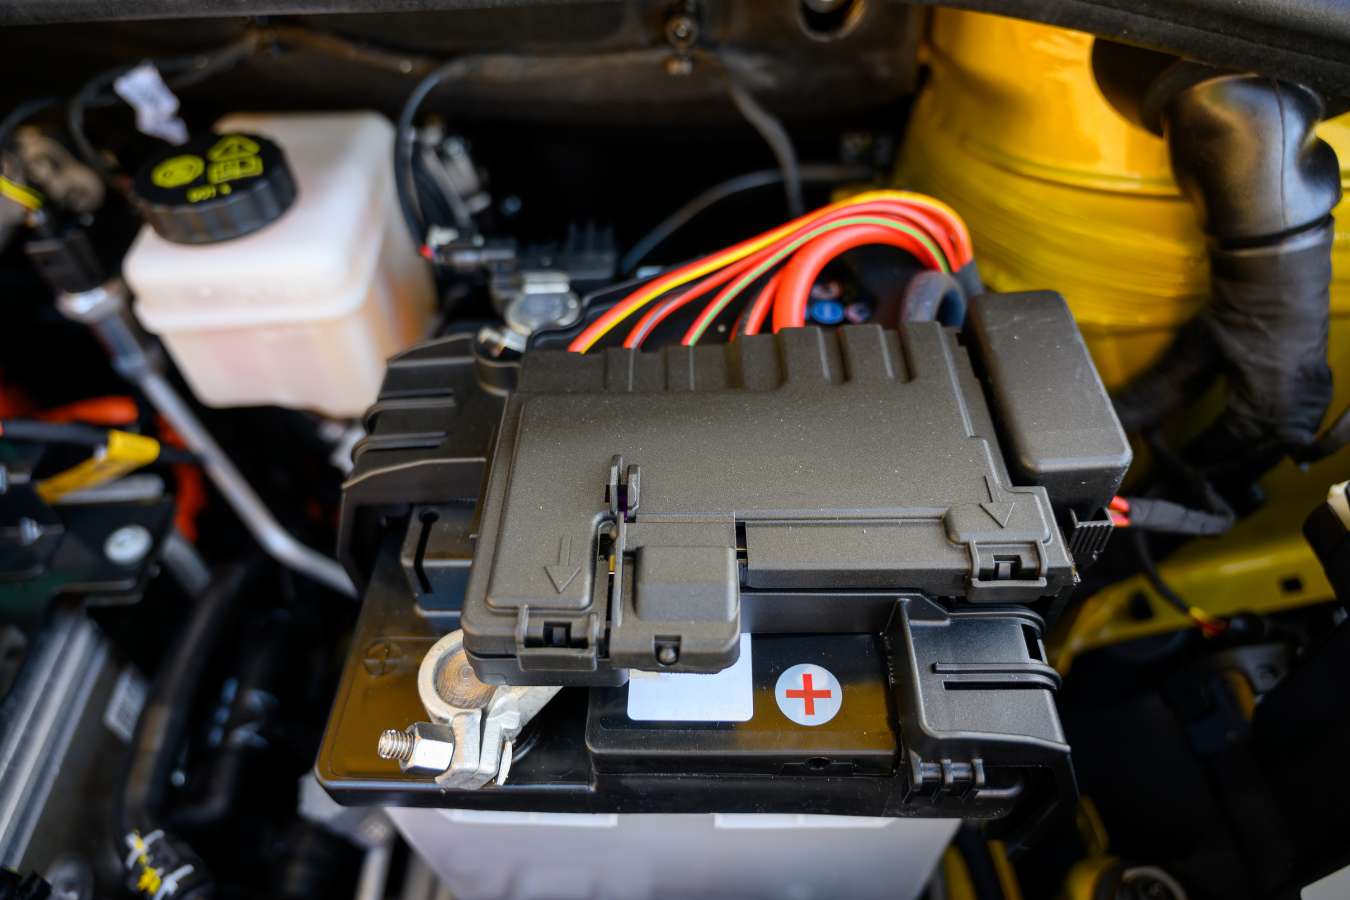 repalcing your car battery - preparation and location of the battery